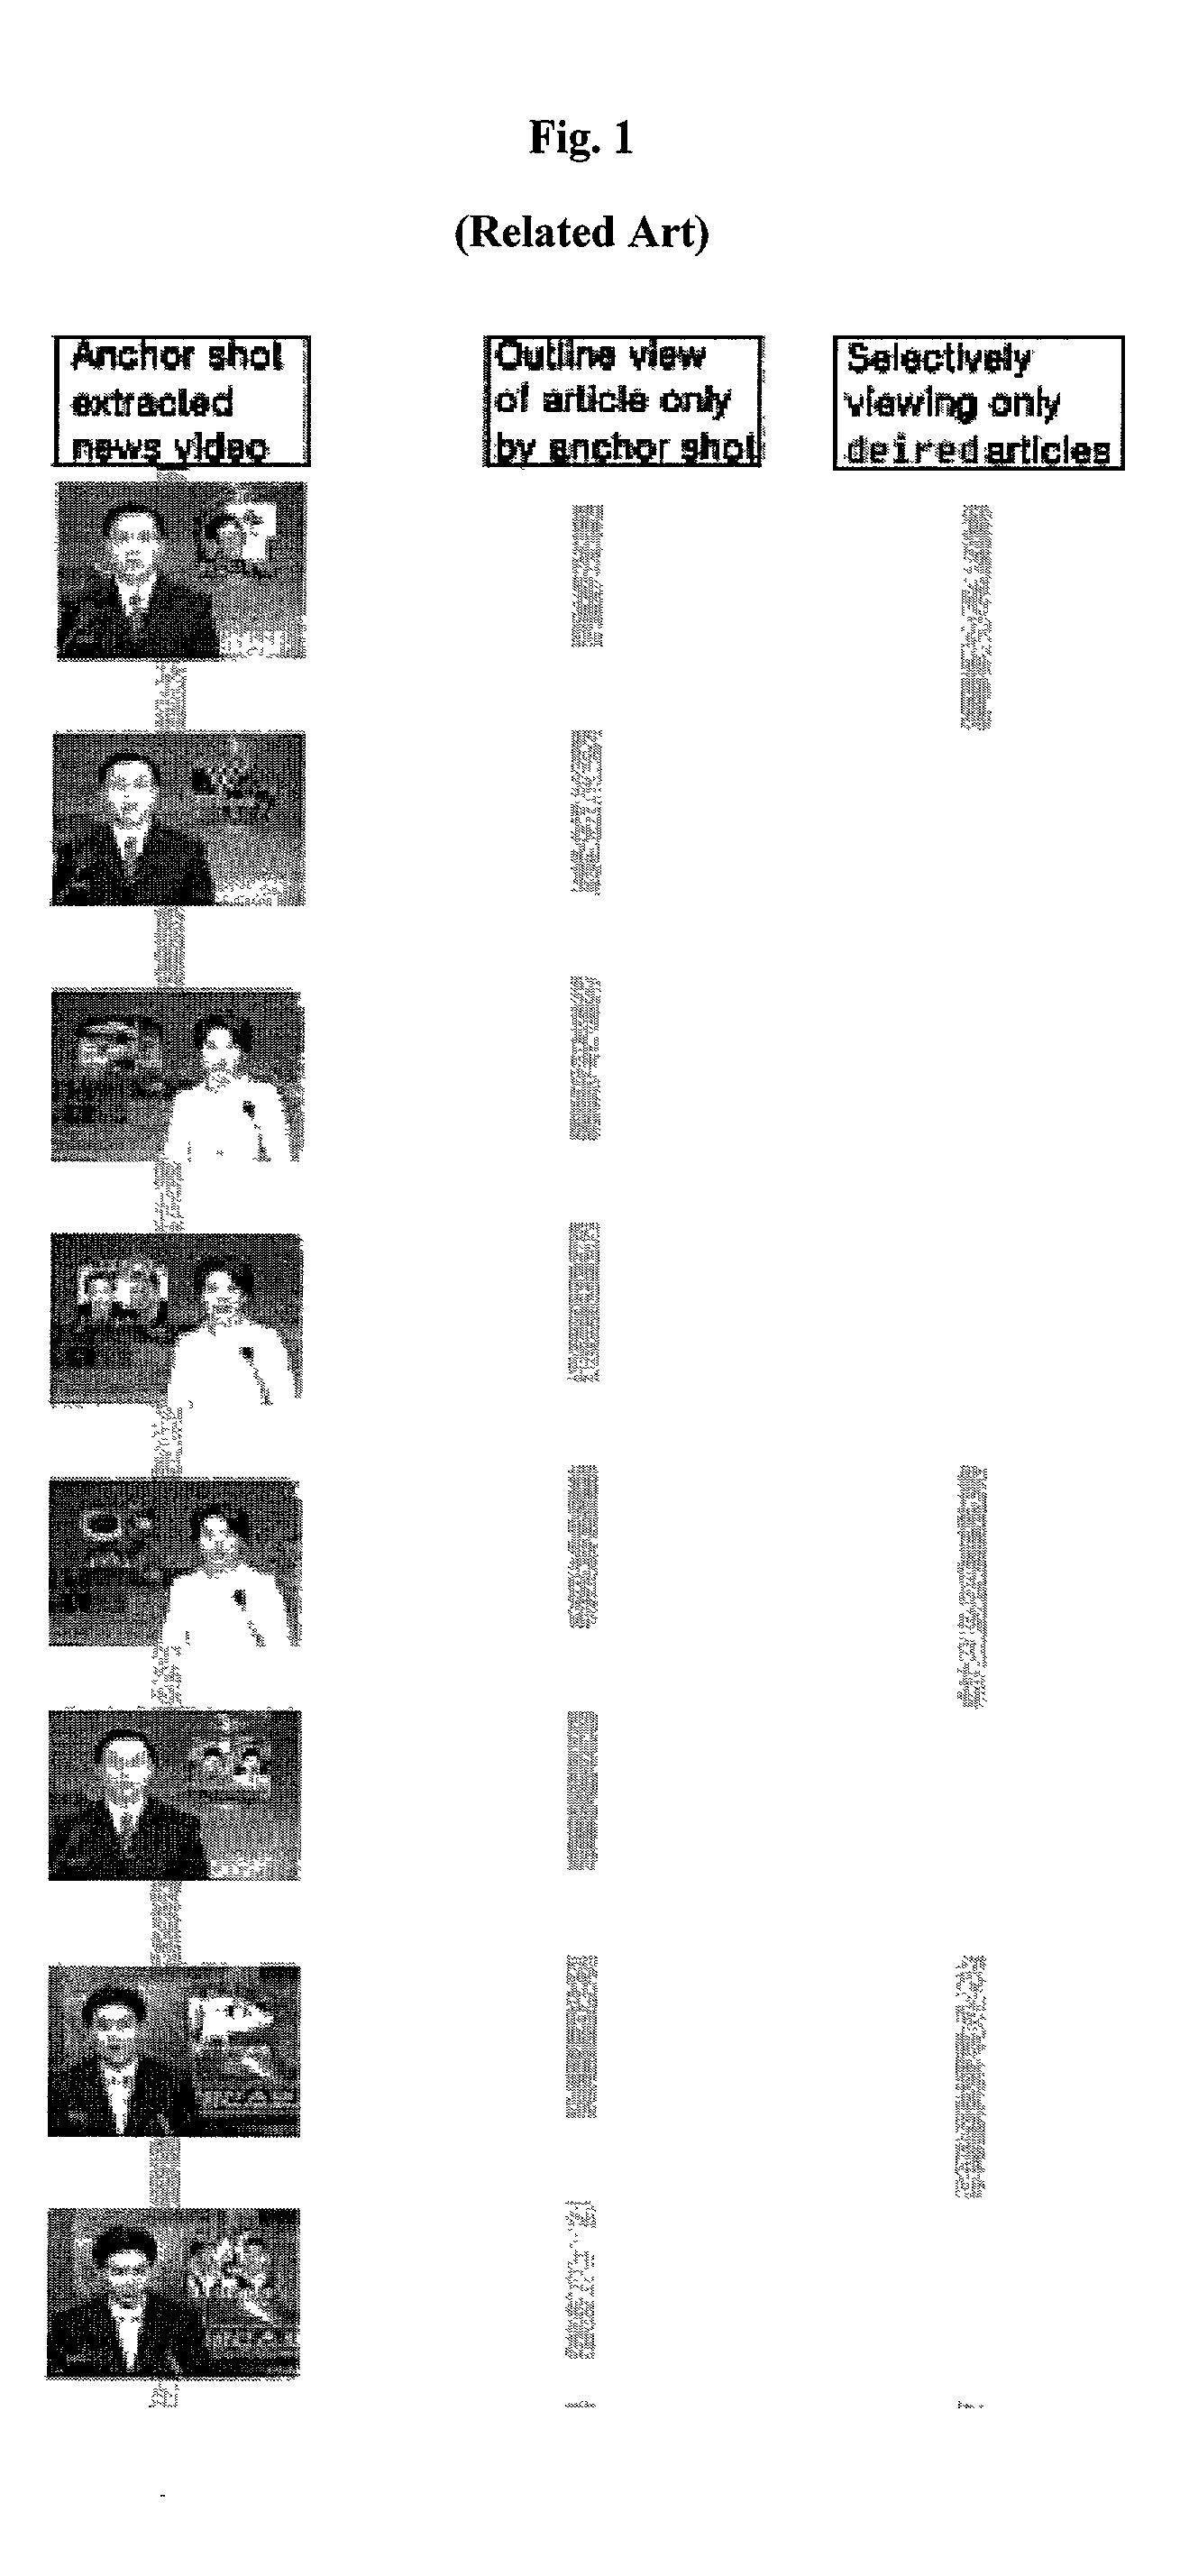 Anchor shot detection method for a news video browsing system